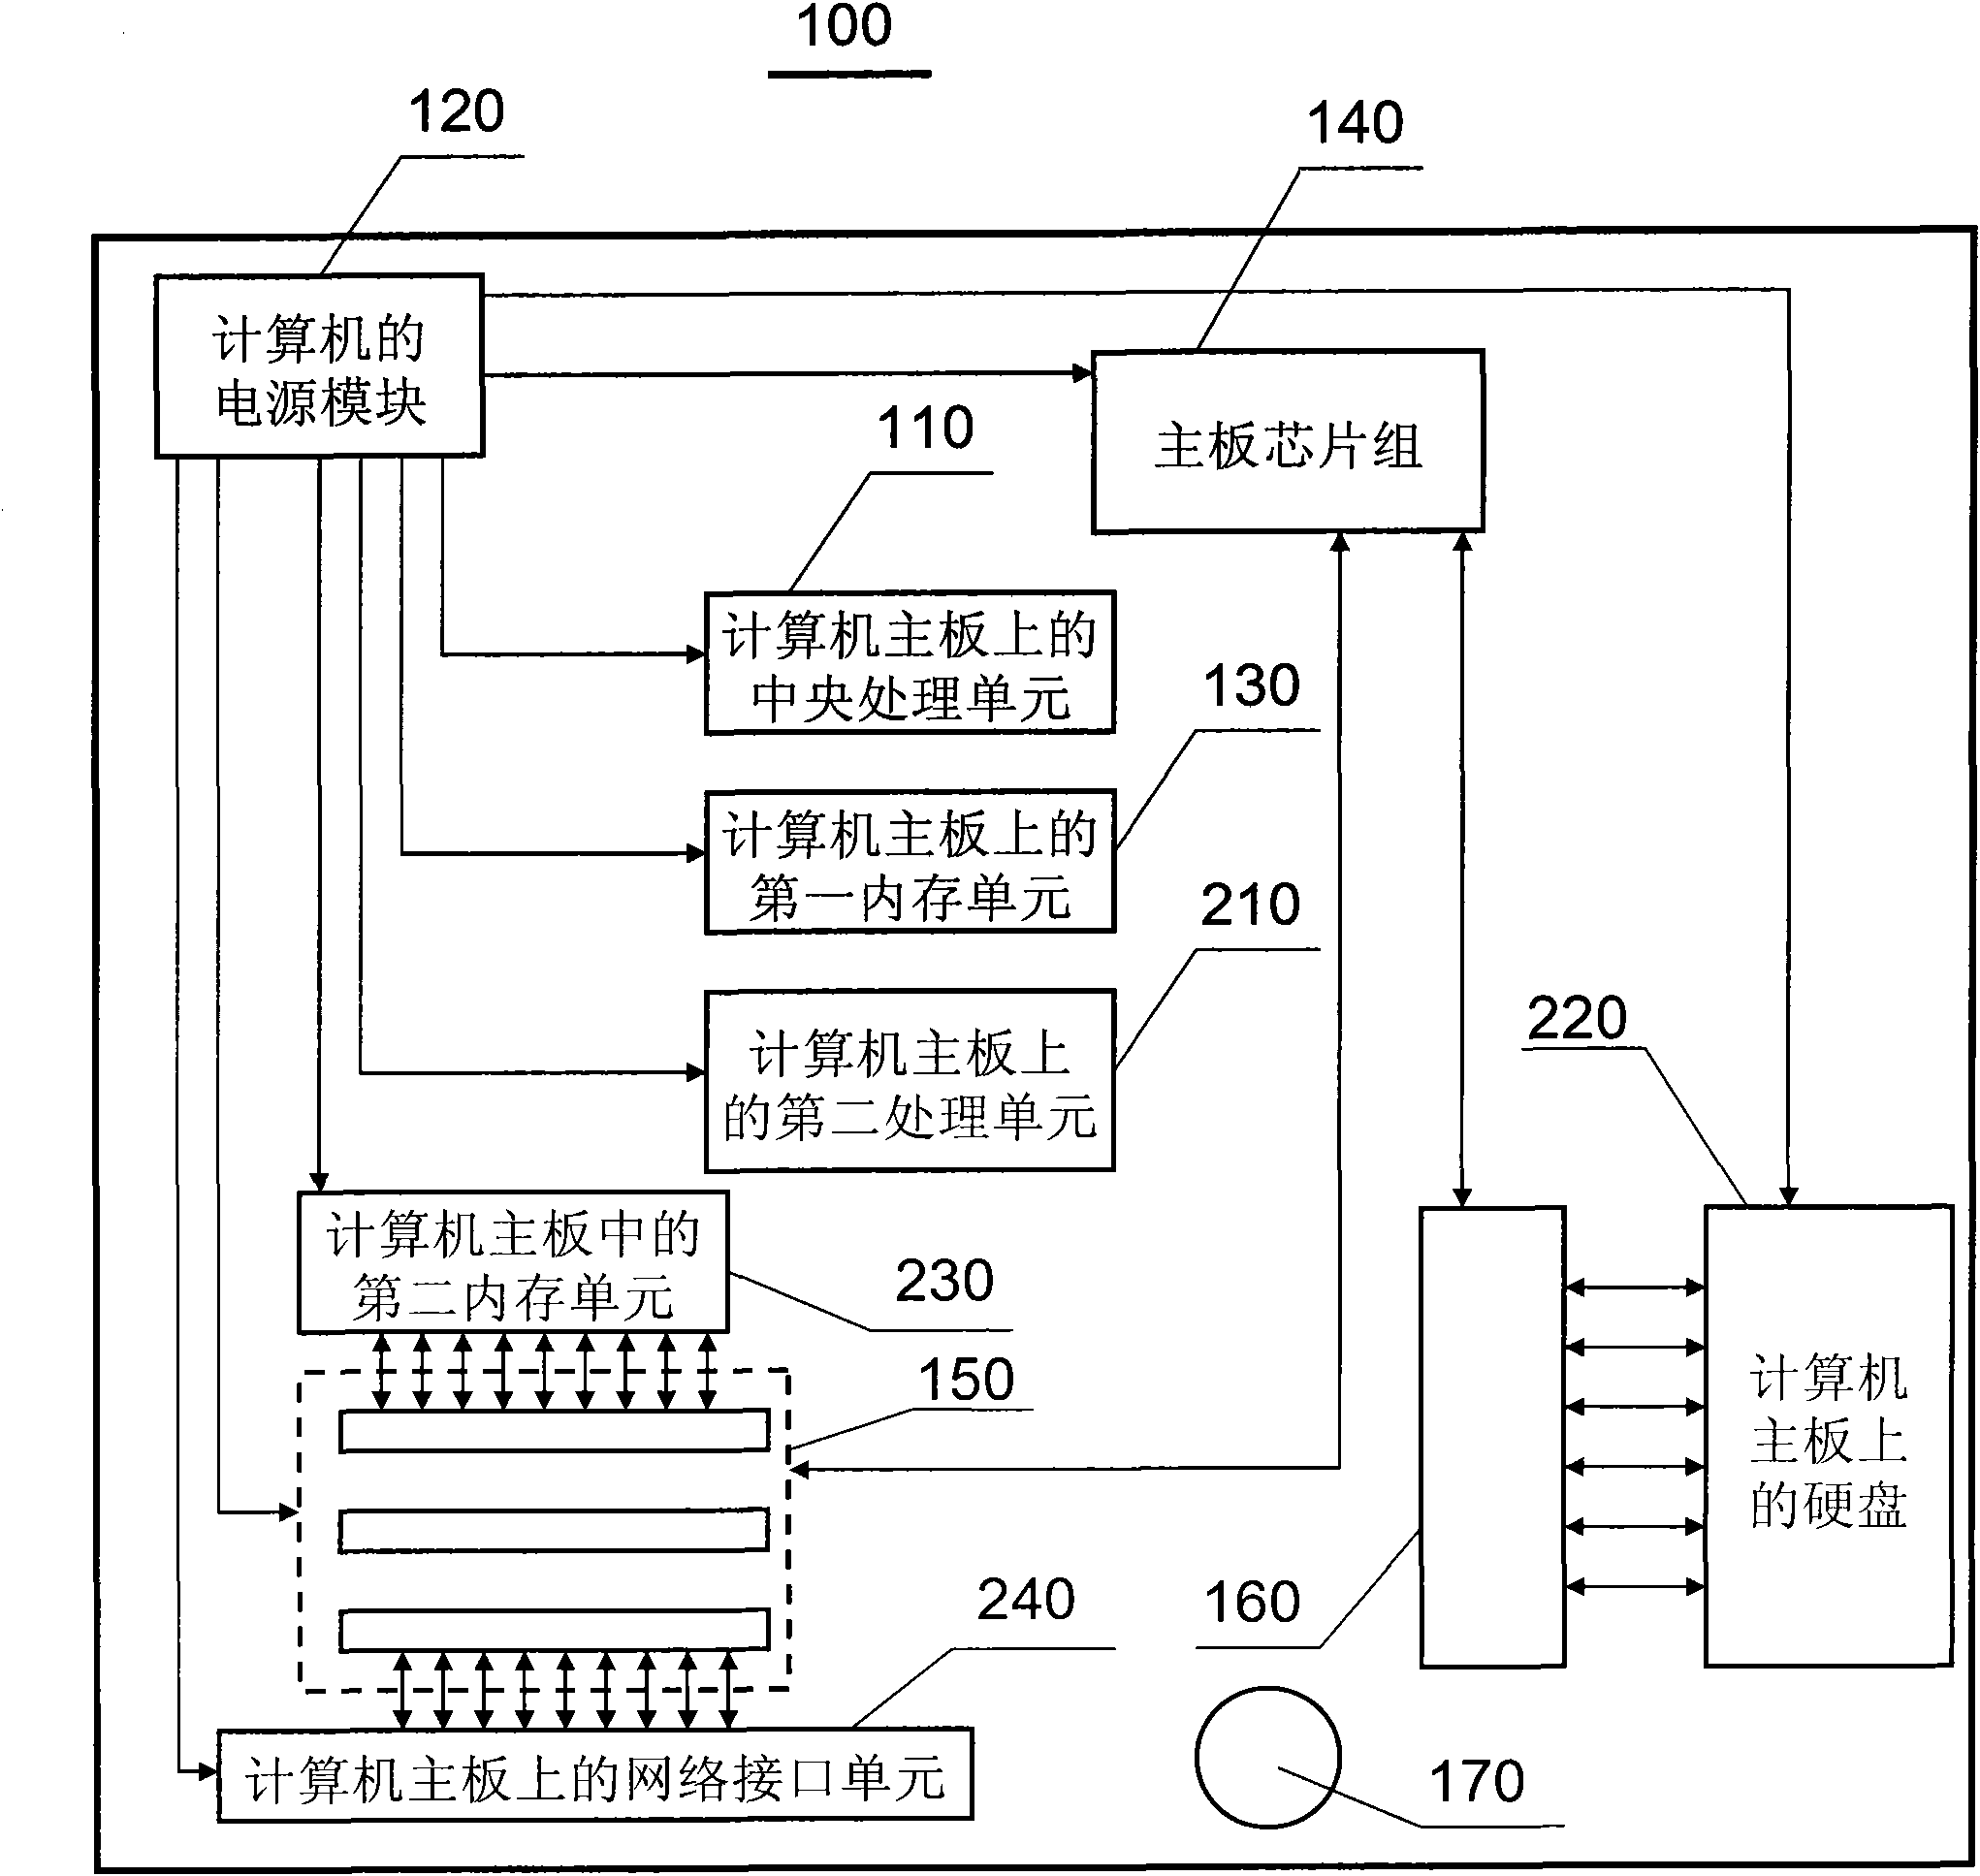 Computer with built-in network storage device